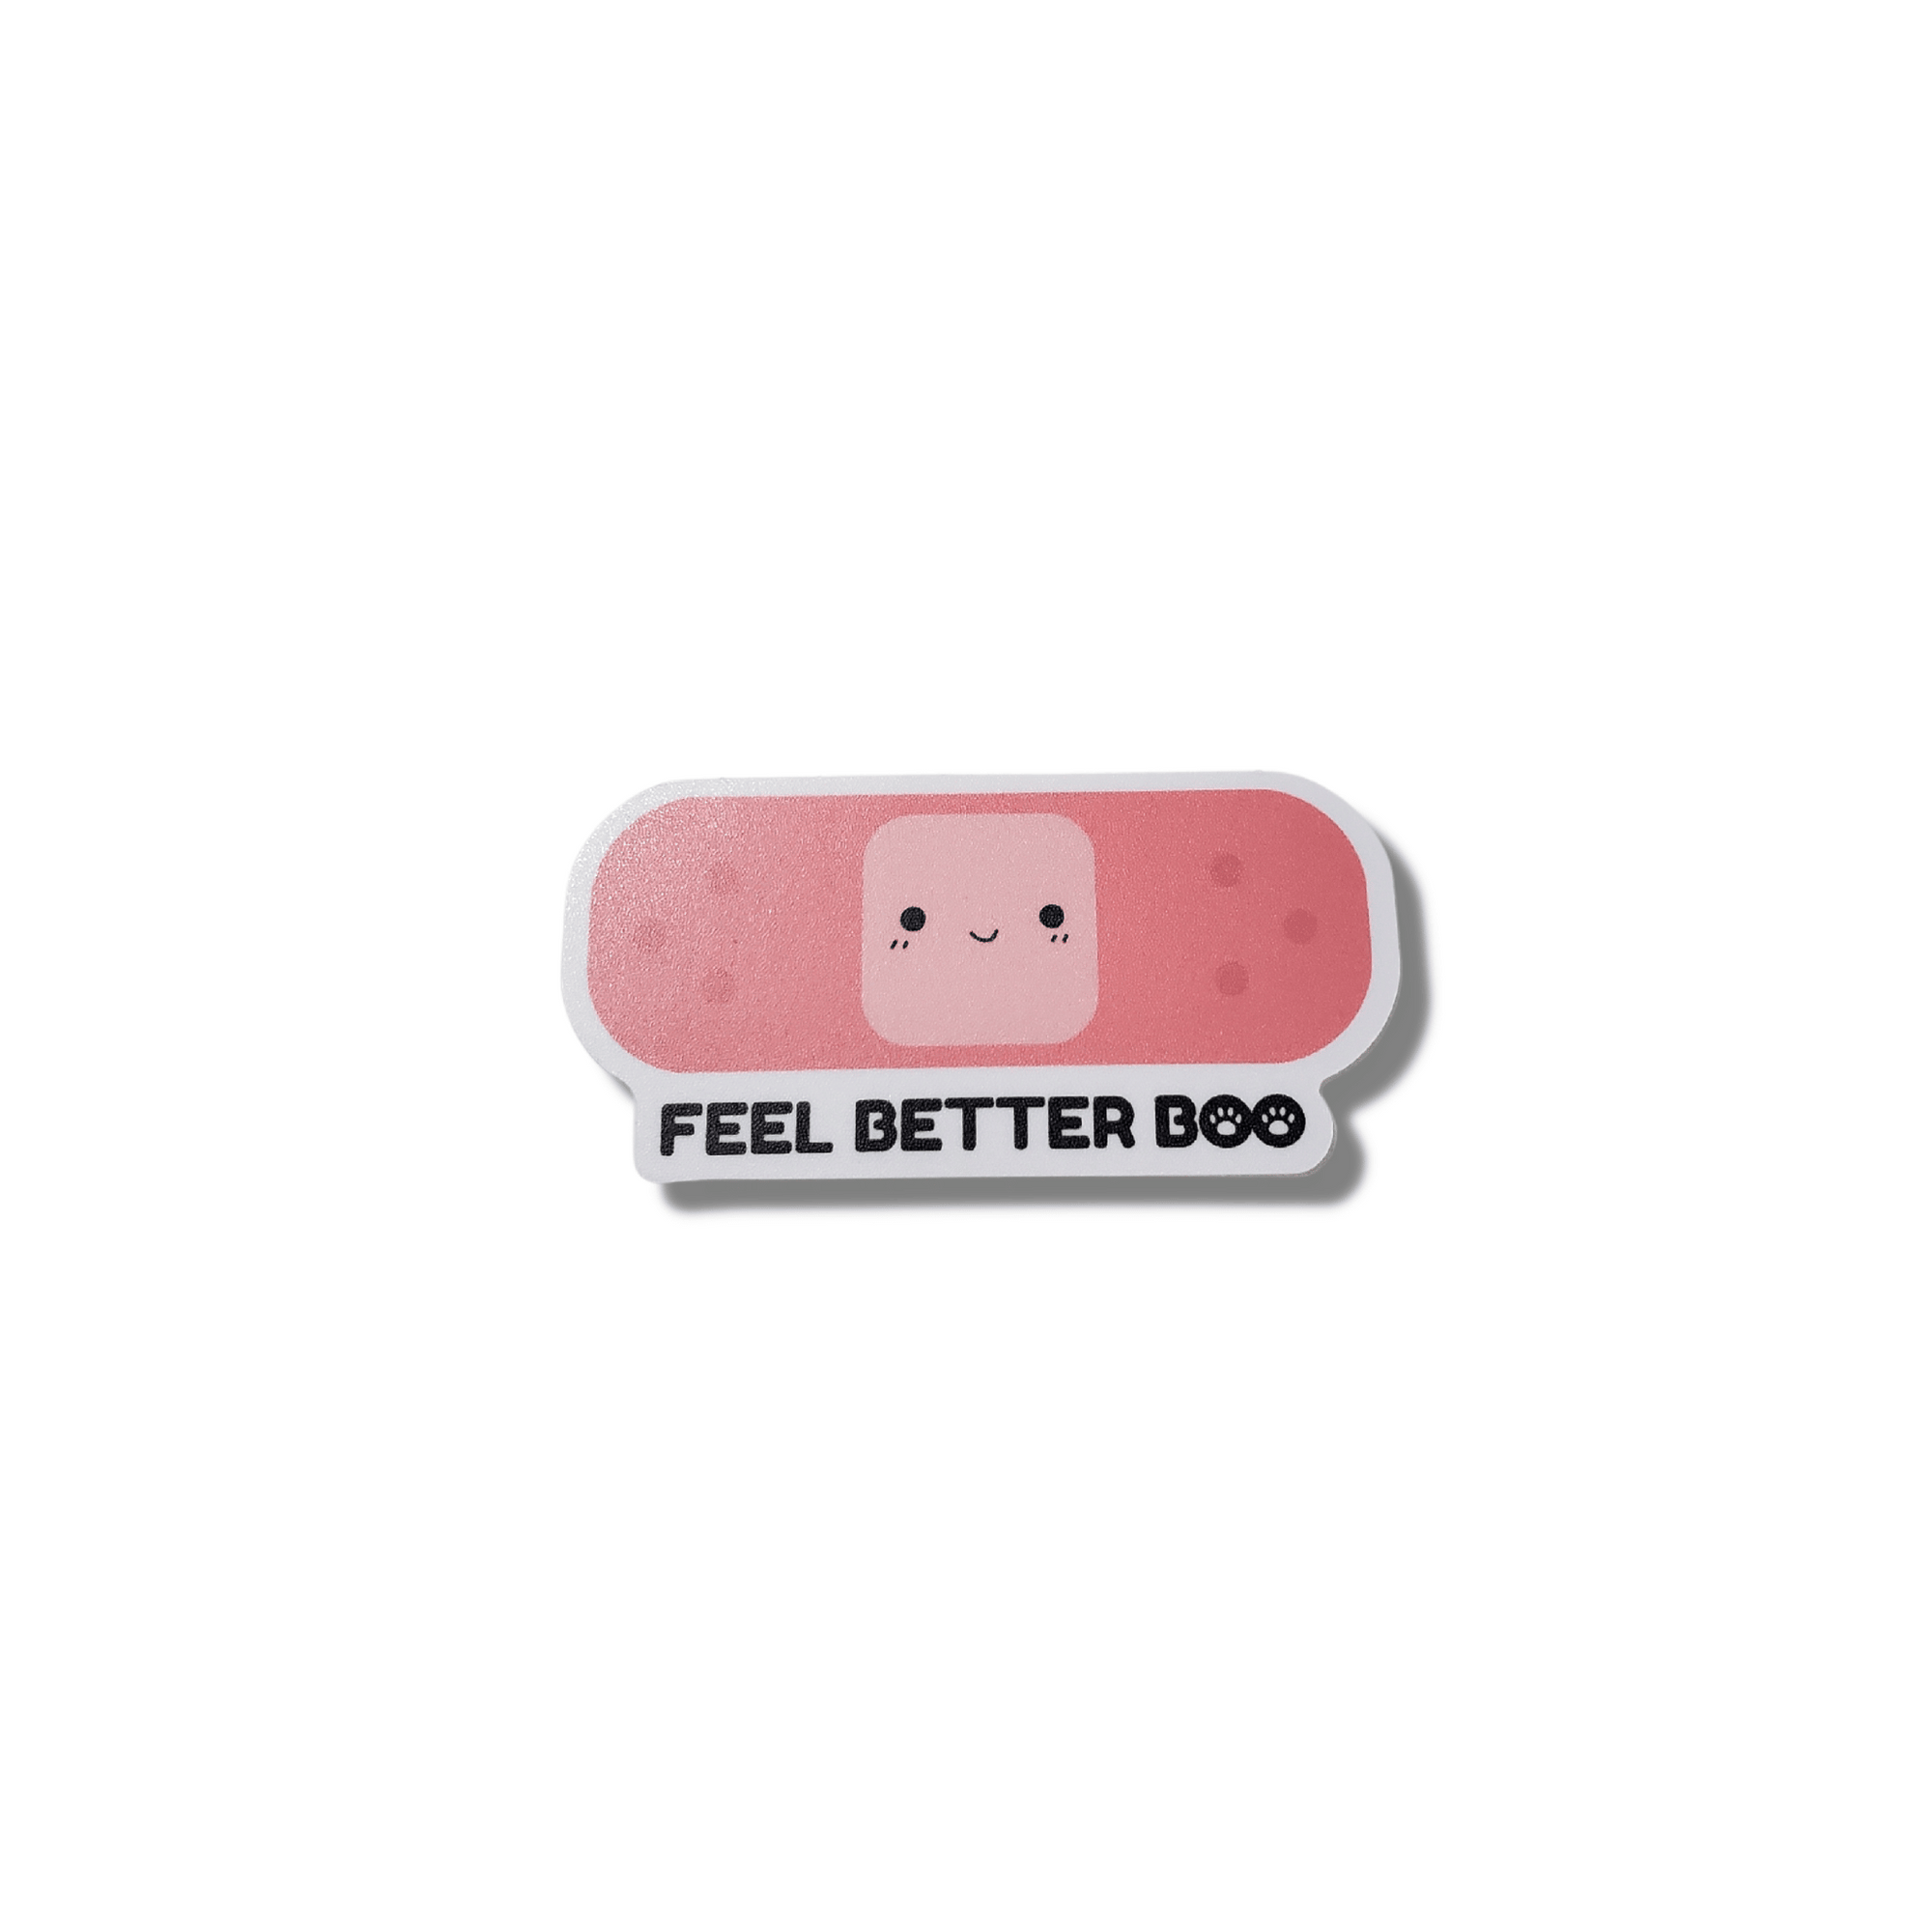 Pet Get Well Wishes Decal - Feel Better Boo